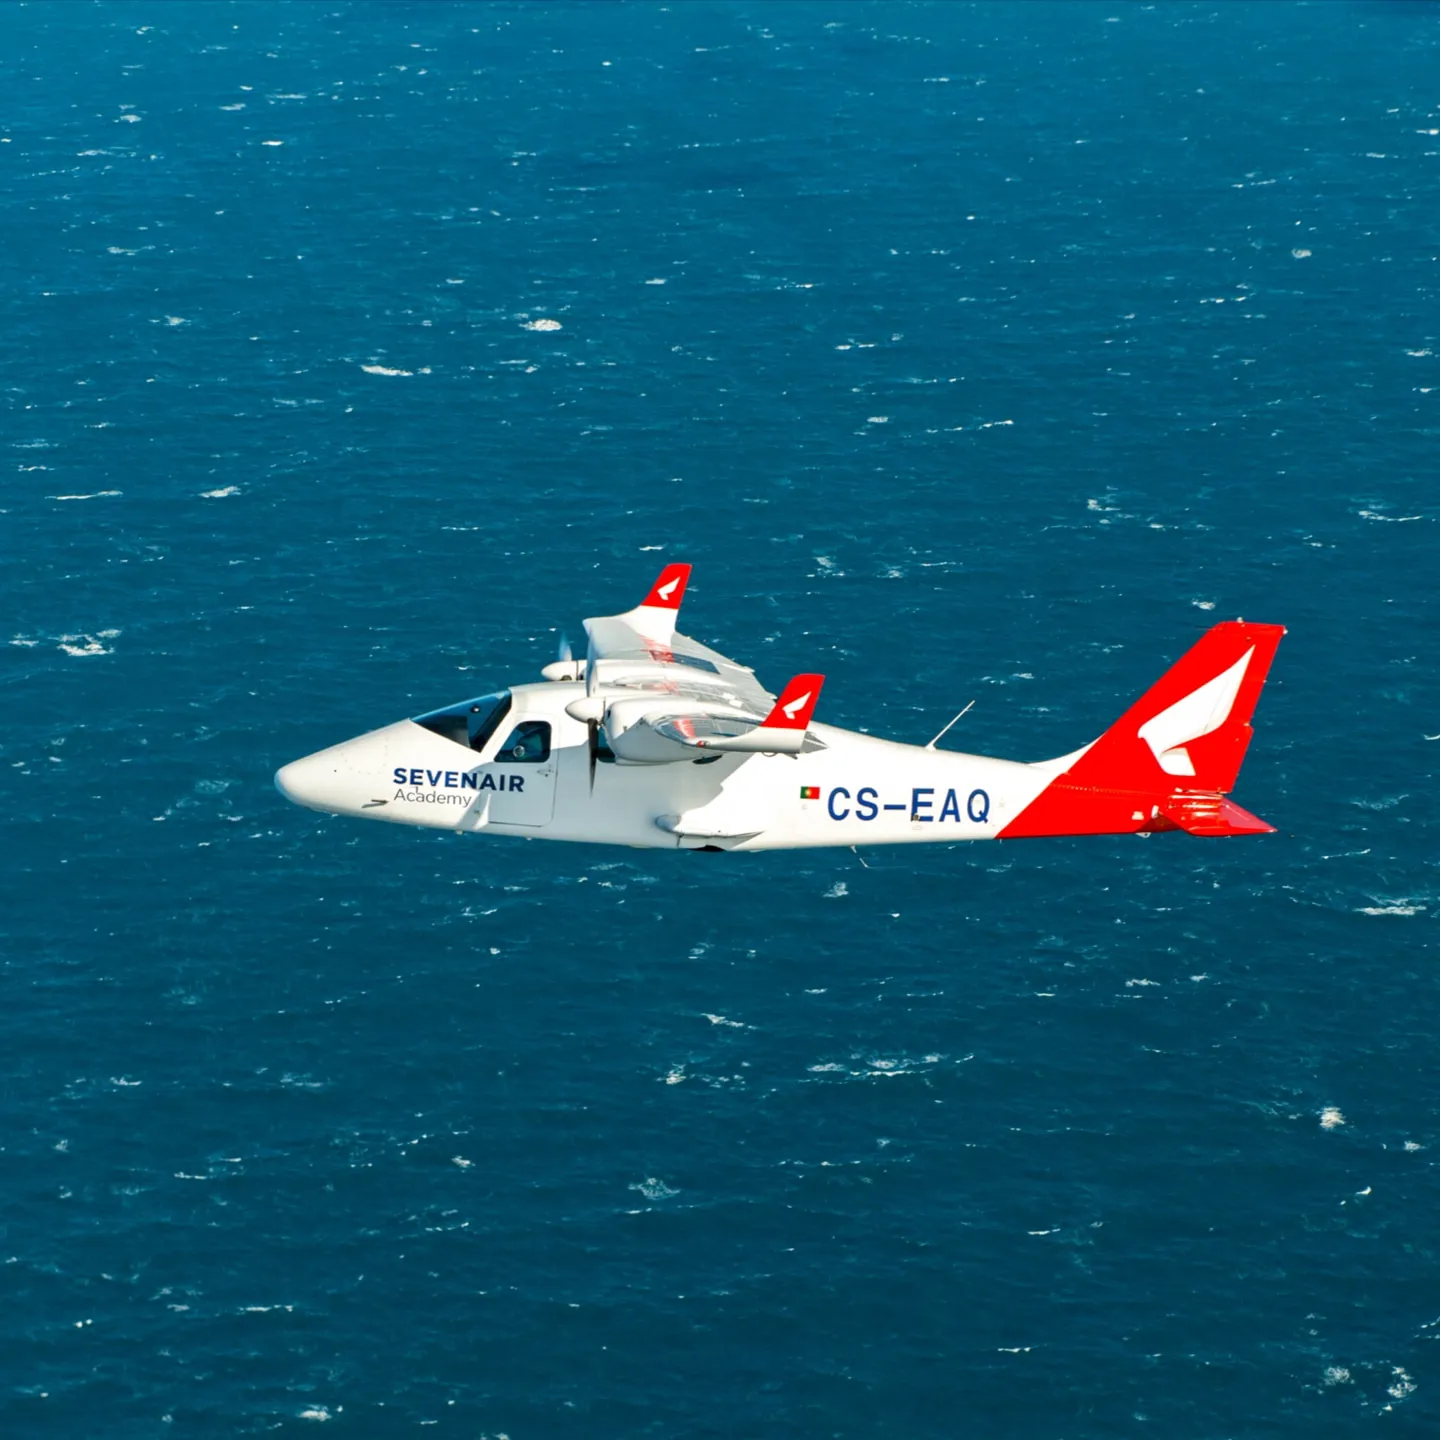 Image of a sevenair plane flying over the water